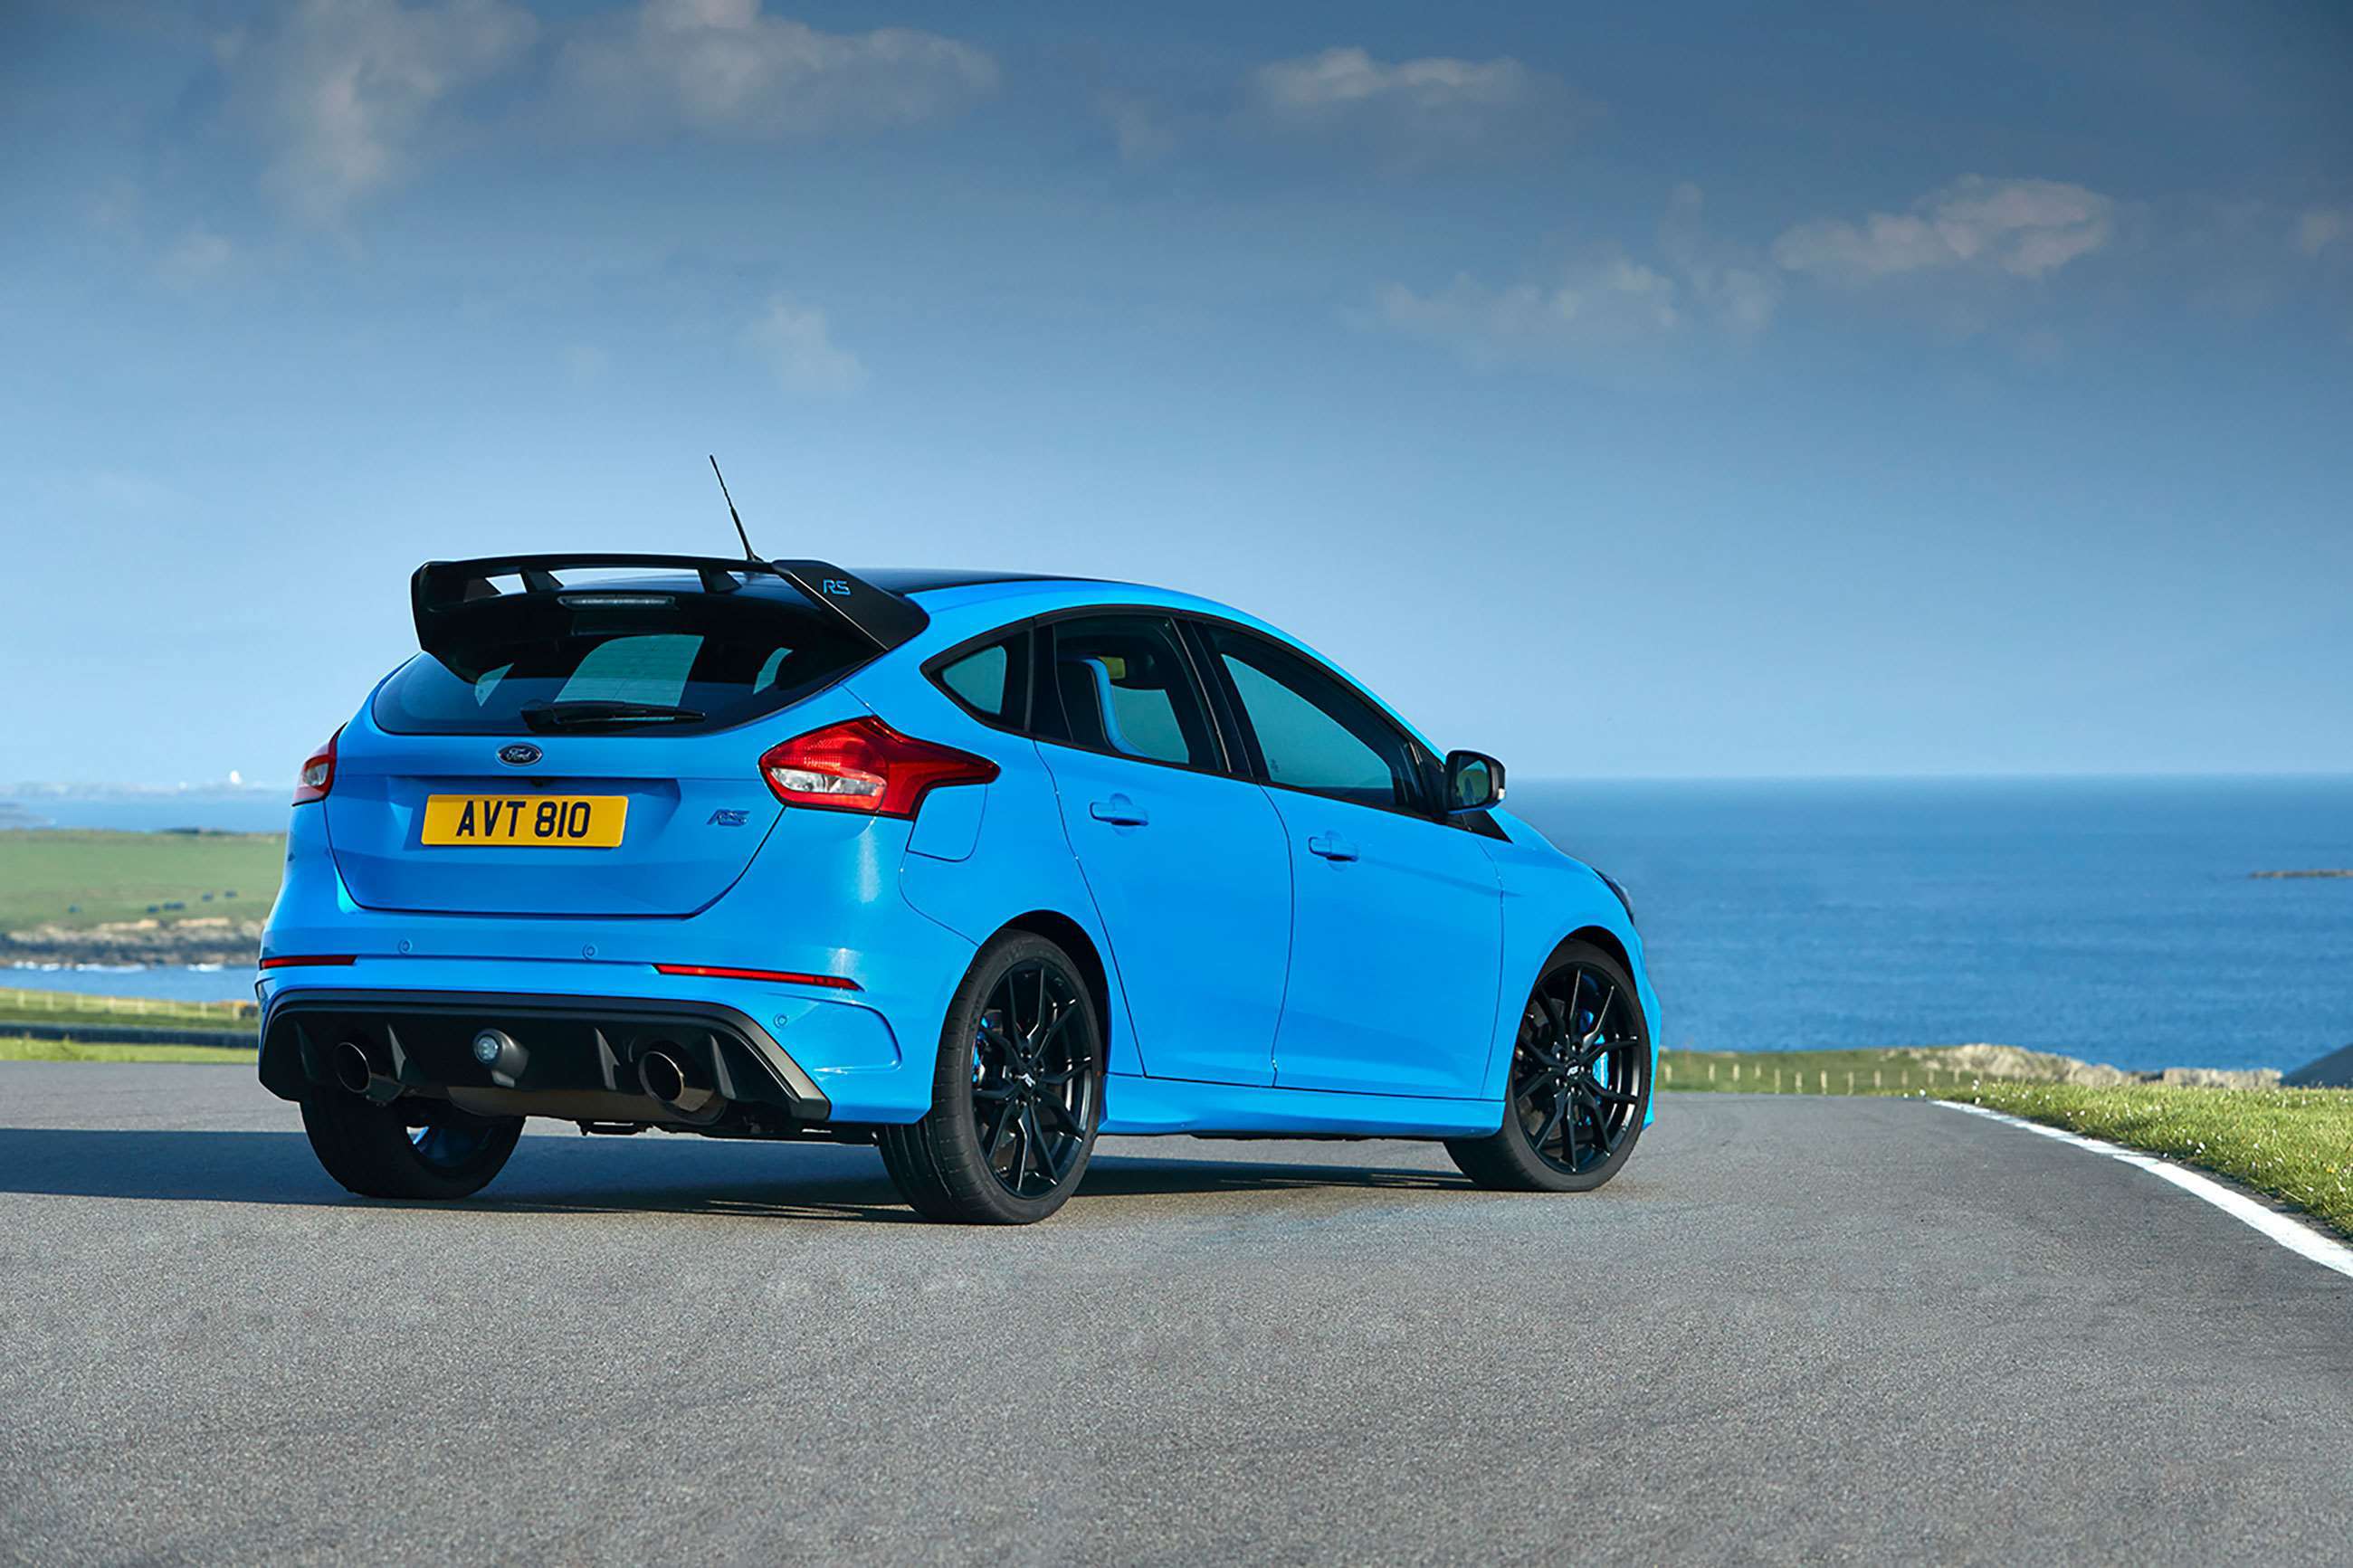 best-hot-hatches-2010s-5-ford-focus-rs-goodwood-03092020.jpg